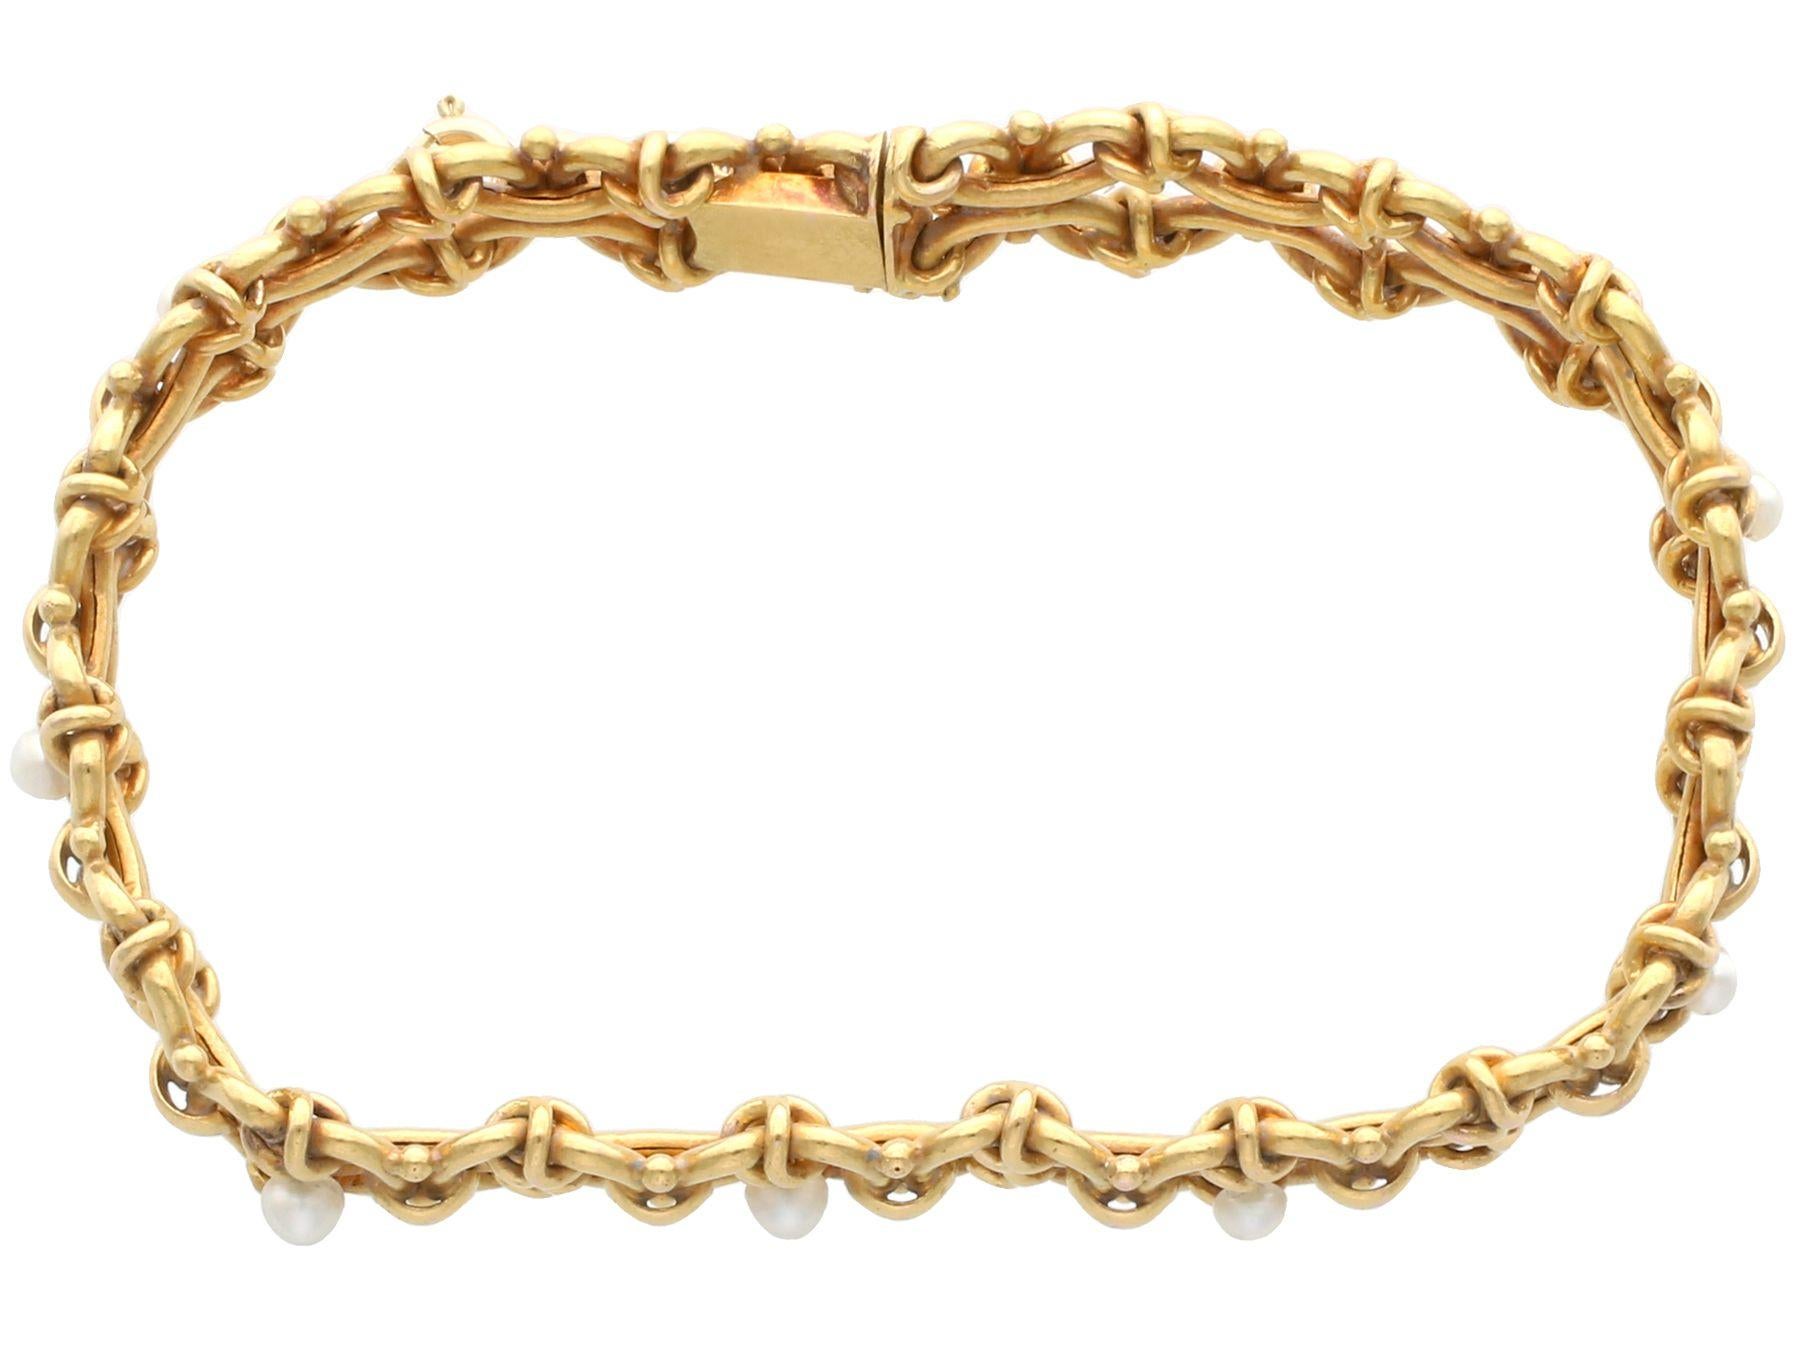 An impressive antique natural pearl and 18 karat yellow gold bracelet; part of our diverse antique jewelry and estate jewelry collections

This stunning antique Victorian bracelet has been crafted in 18k yellow gold.

The bracelet consists of